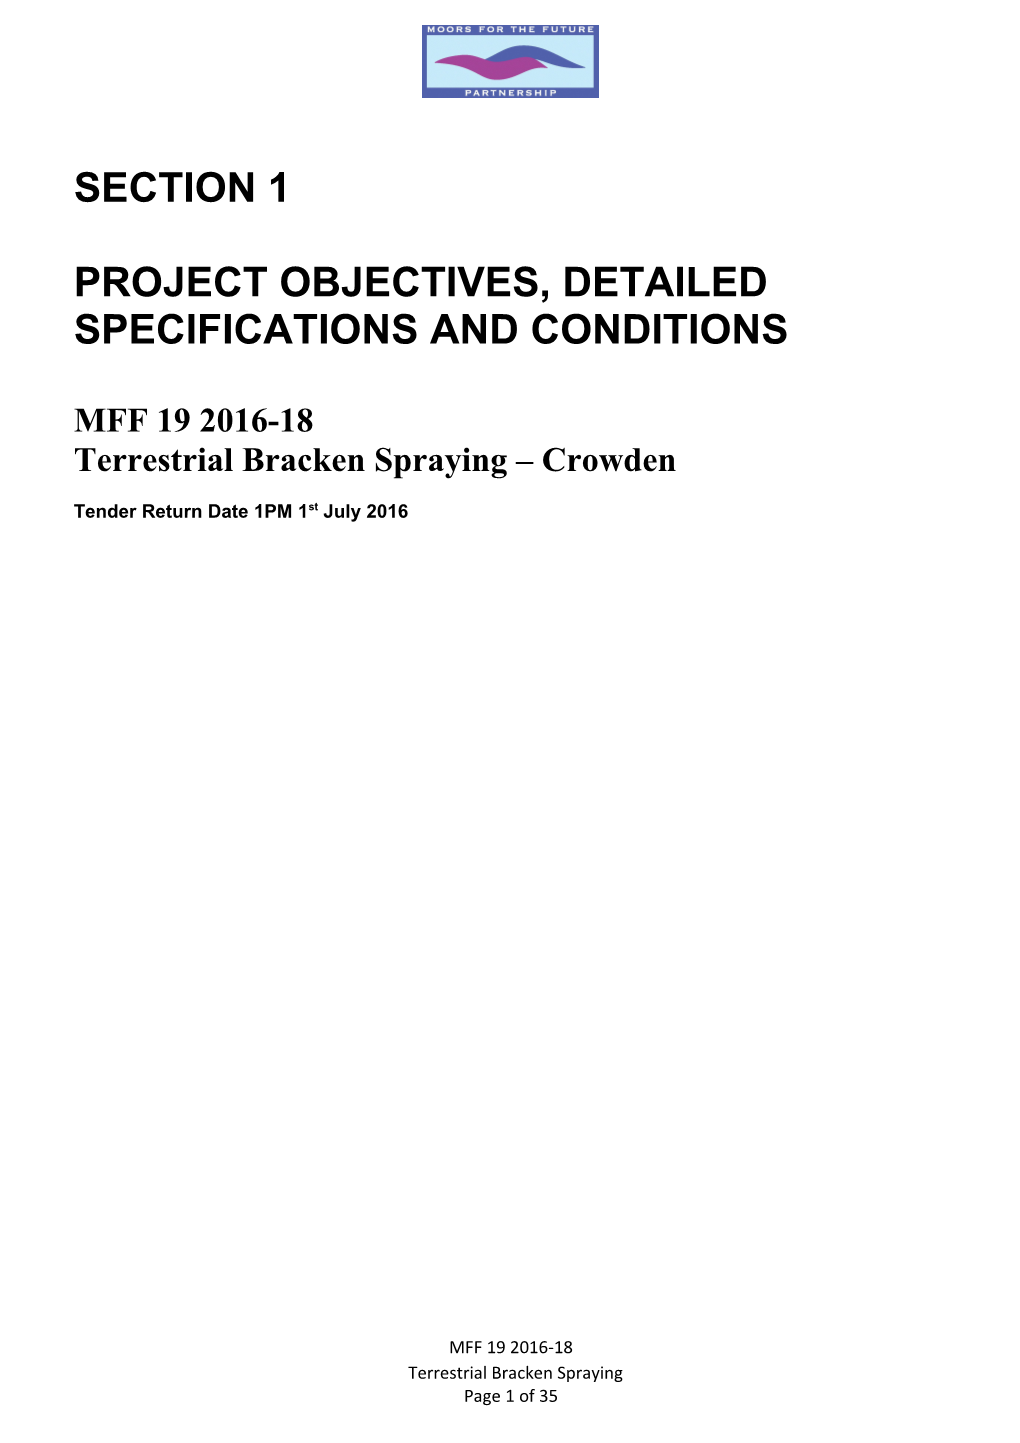 Project Objectives, Detailed Specifications and Conditions